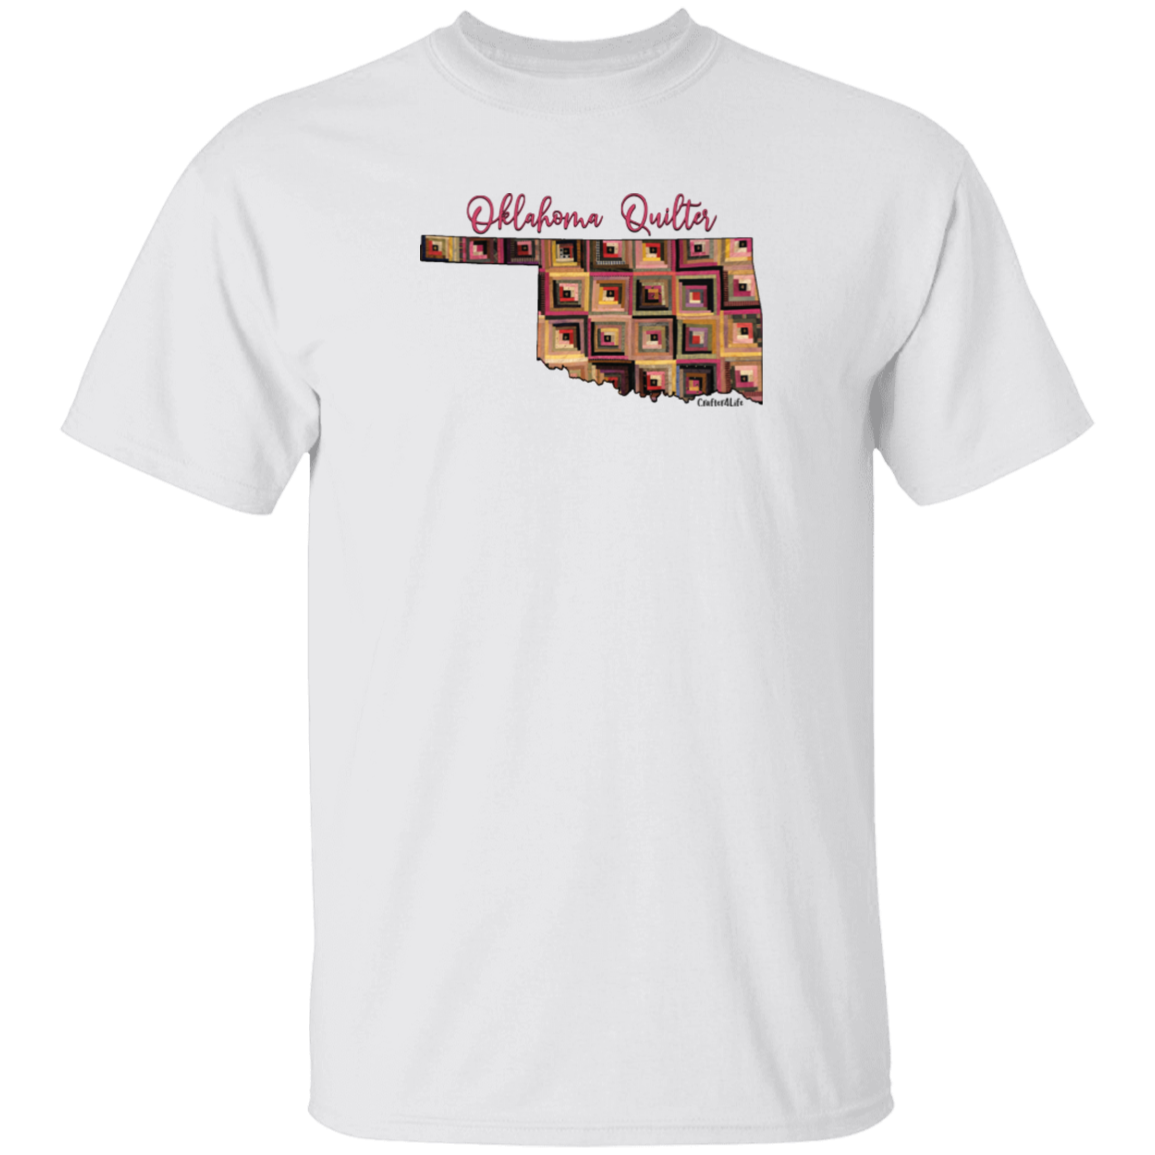 Oklahoma Quilter T-Shirt, Gift for Quilting Friends and Family